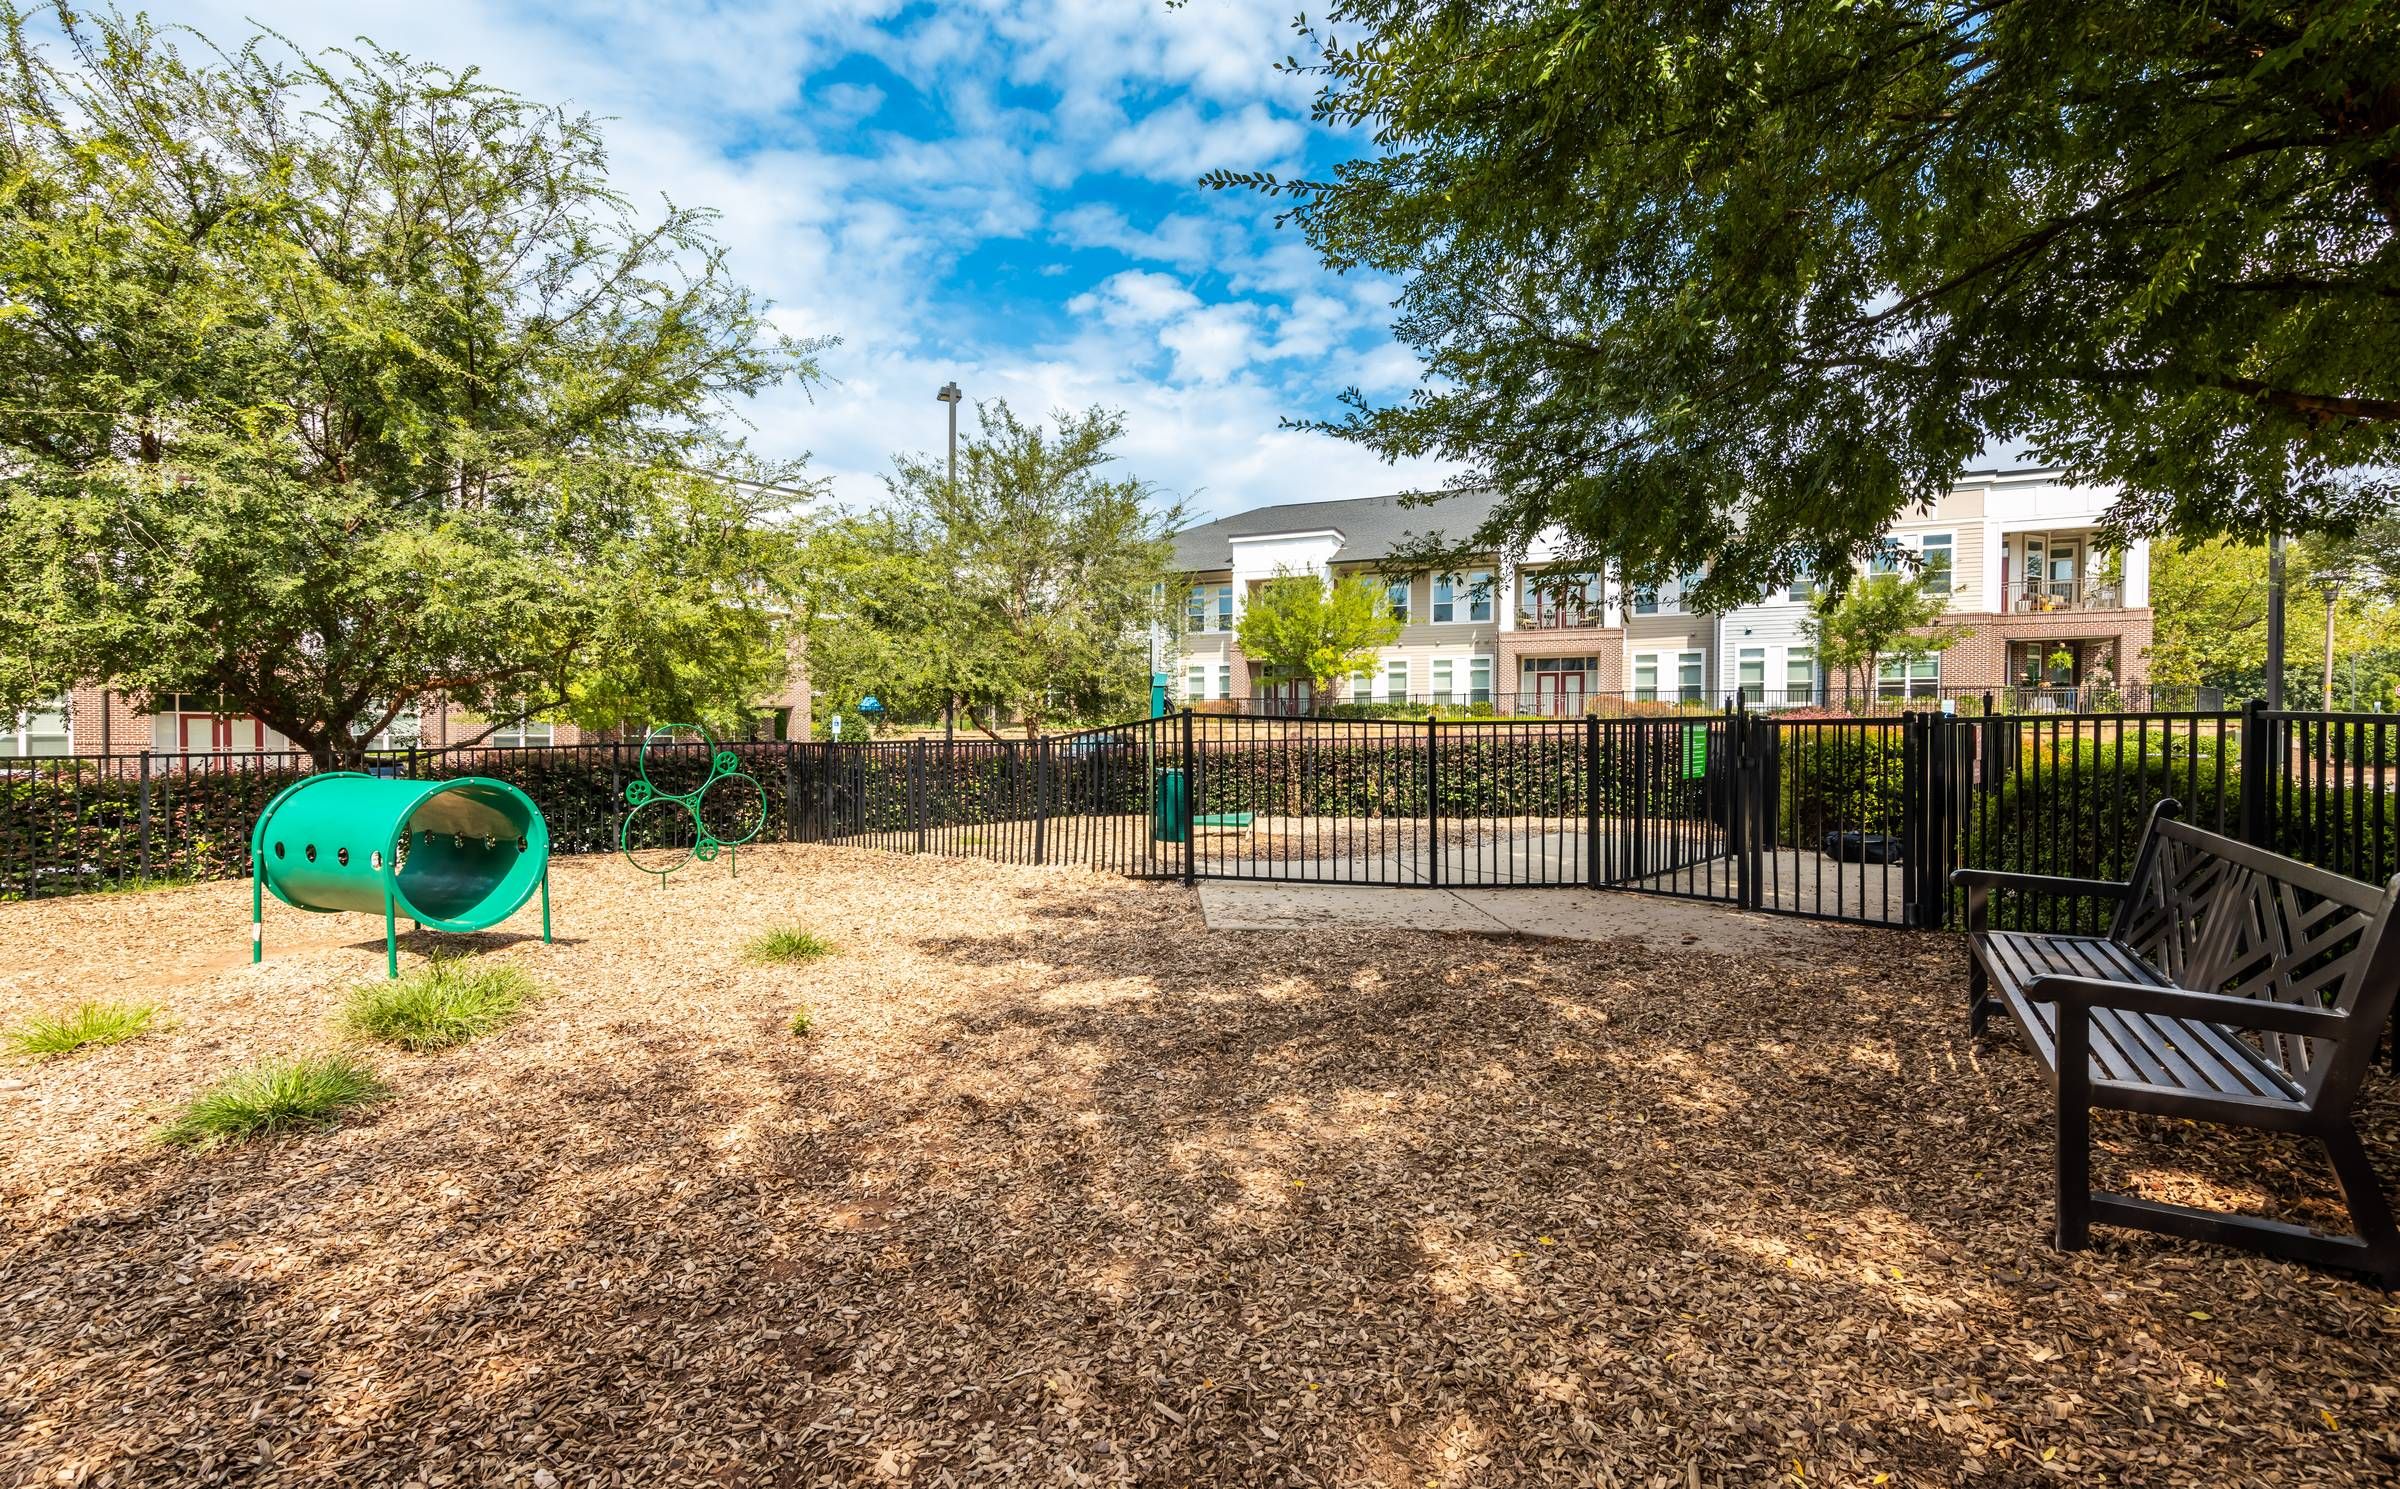 Apartments at holly crest resident dog park amenity